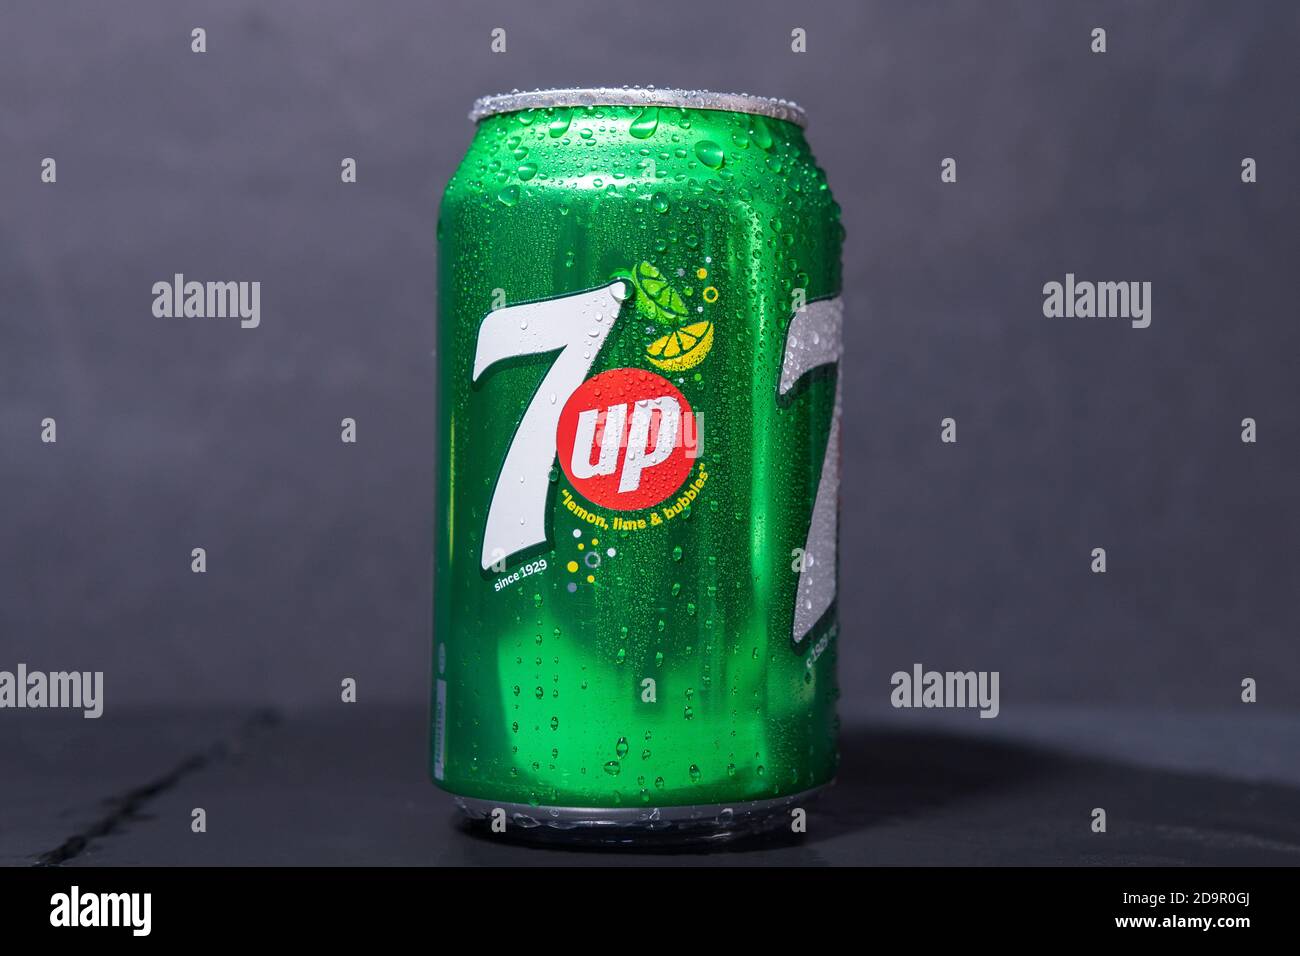 Tyumen, Russia-November 02, 2020: 7 UP can logo close-up. This refreshment drink produce Pepsi company. Stock Photo